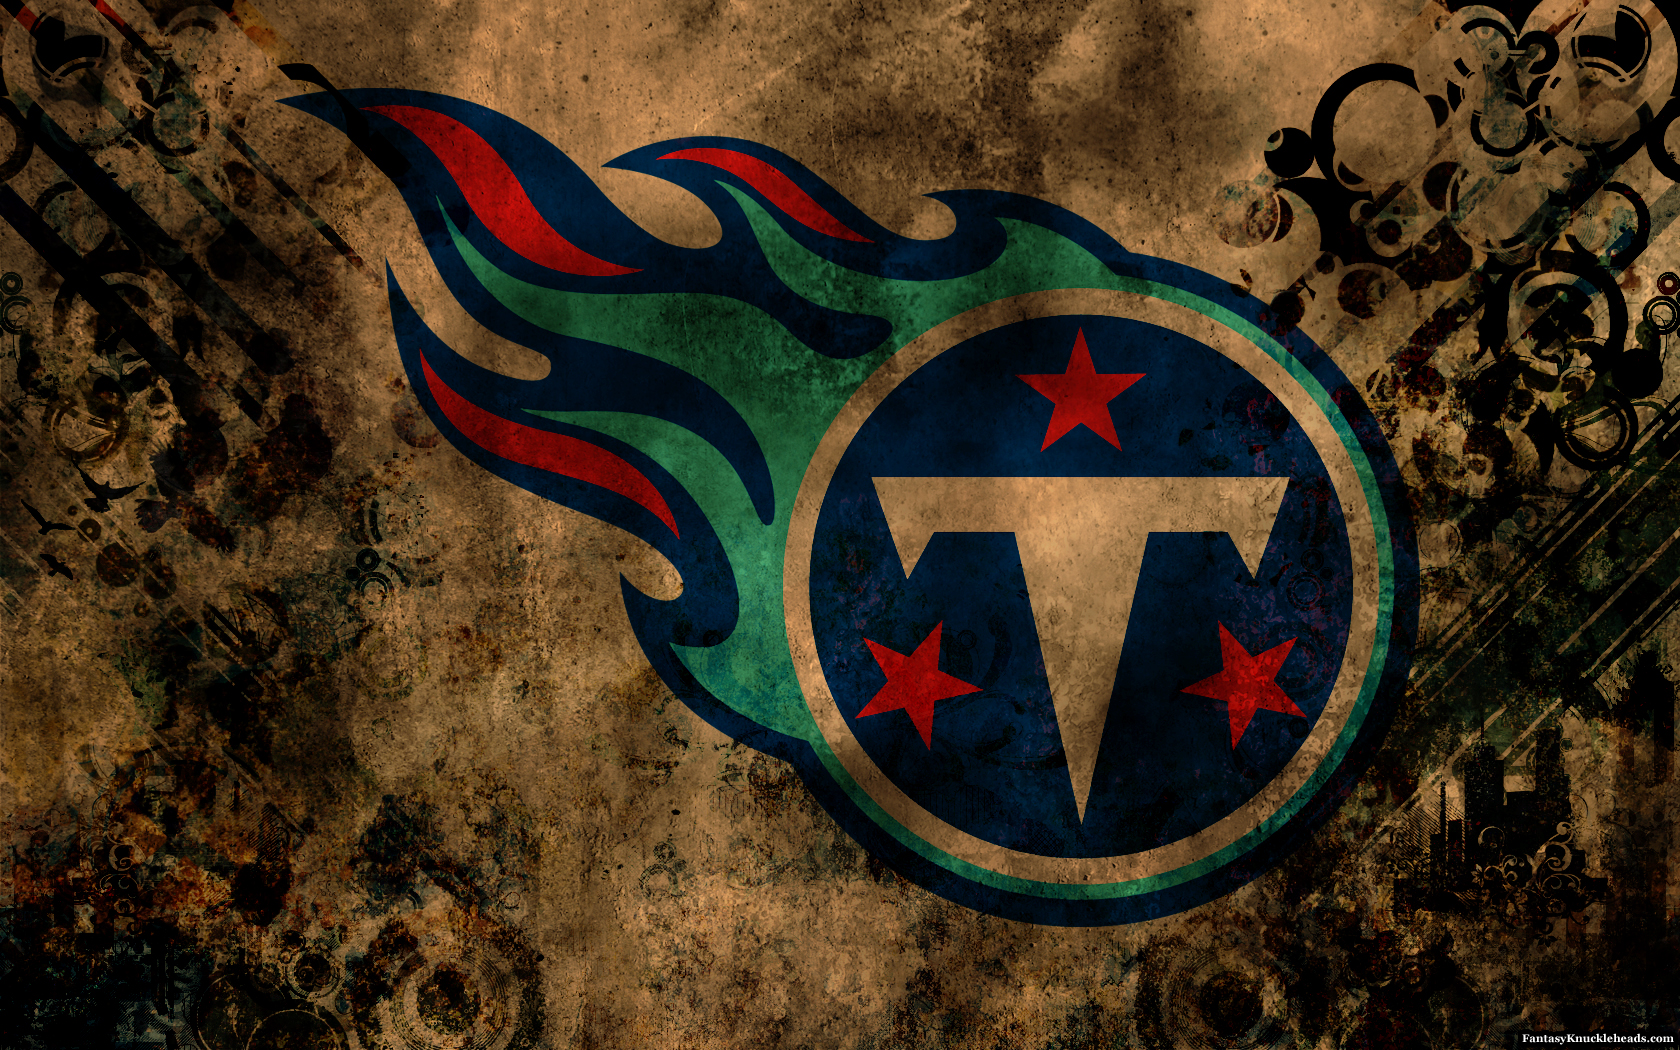 Gallery For Gt Tennessee Titans Wallpaper